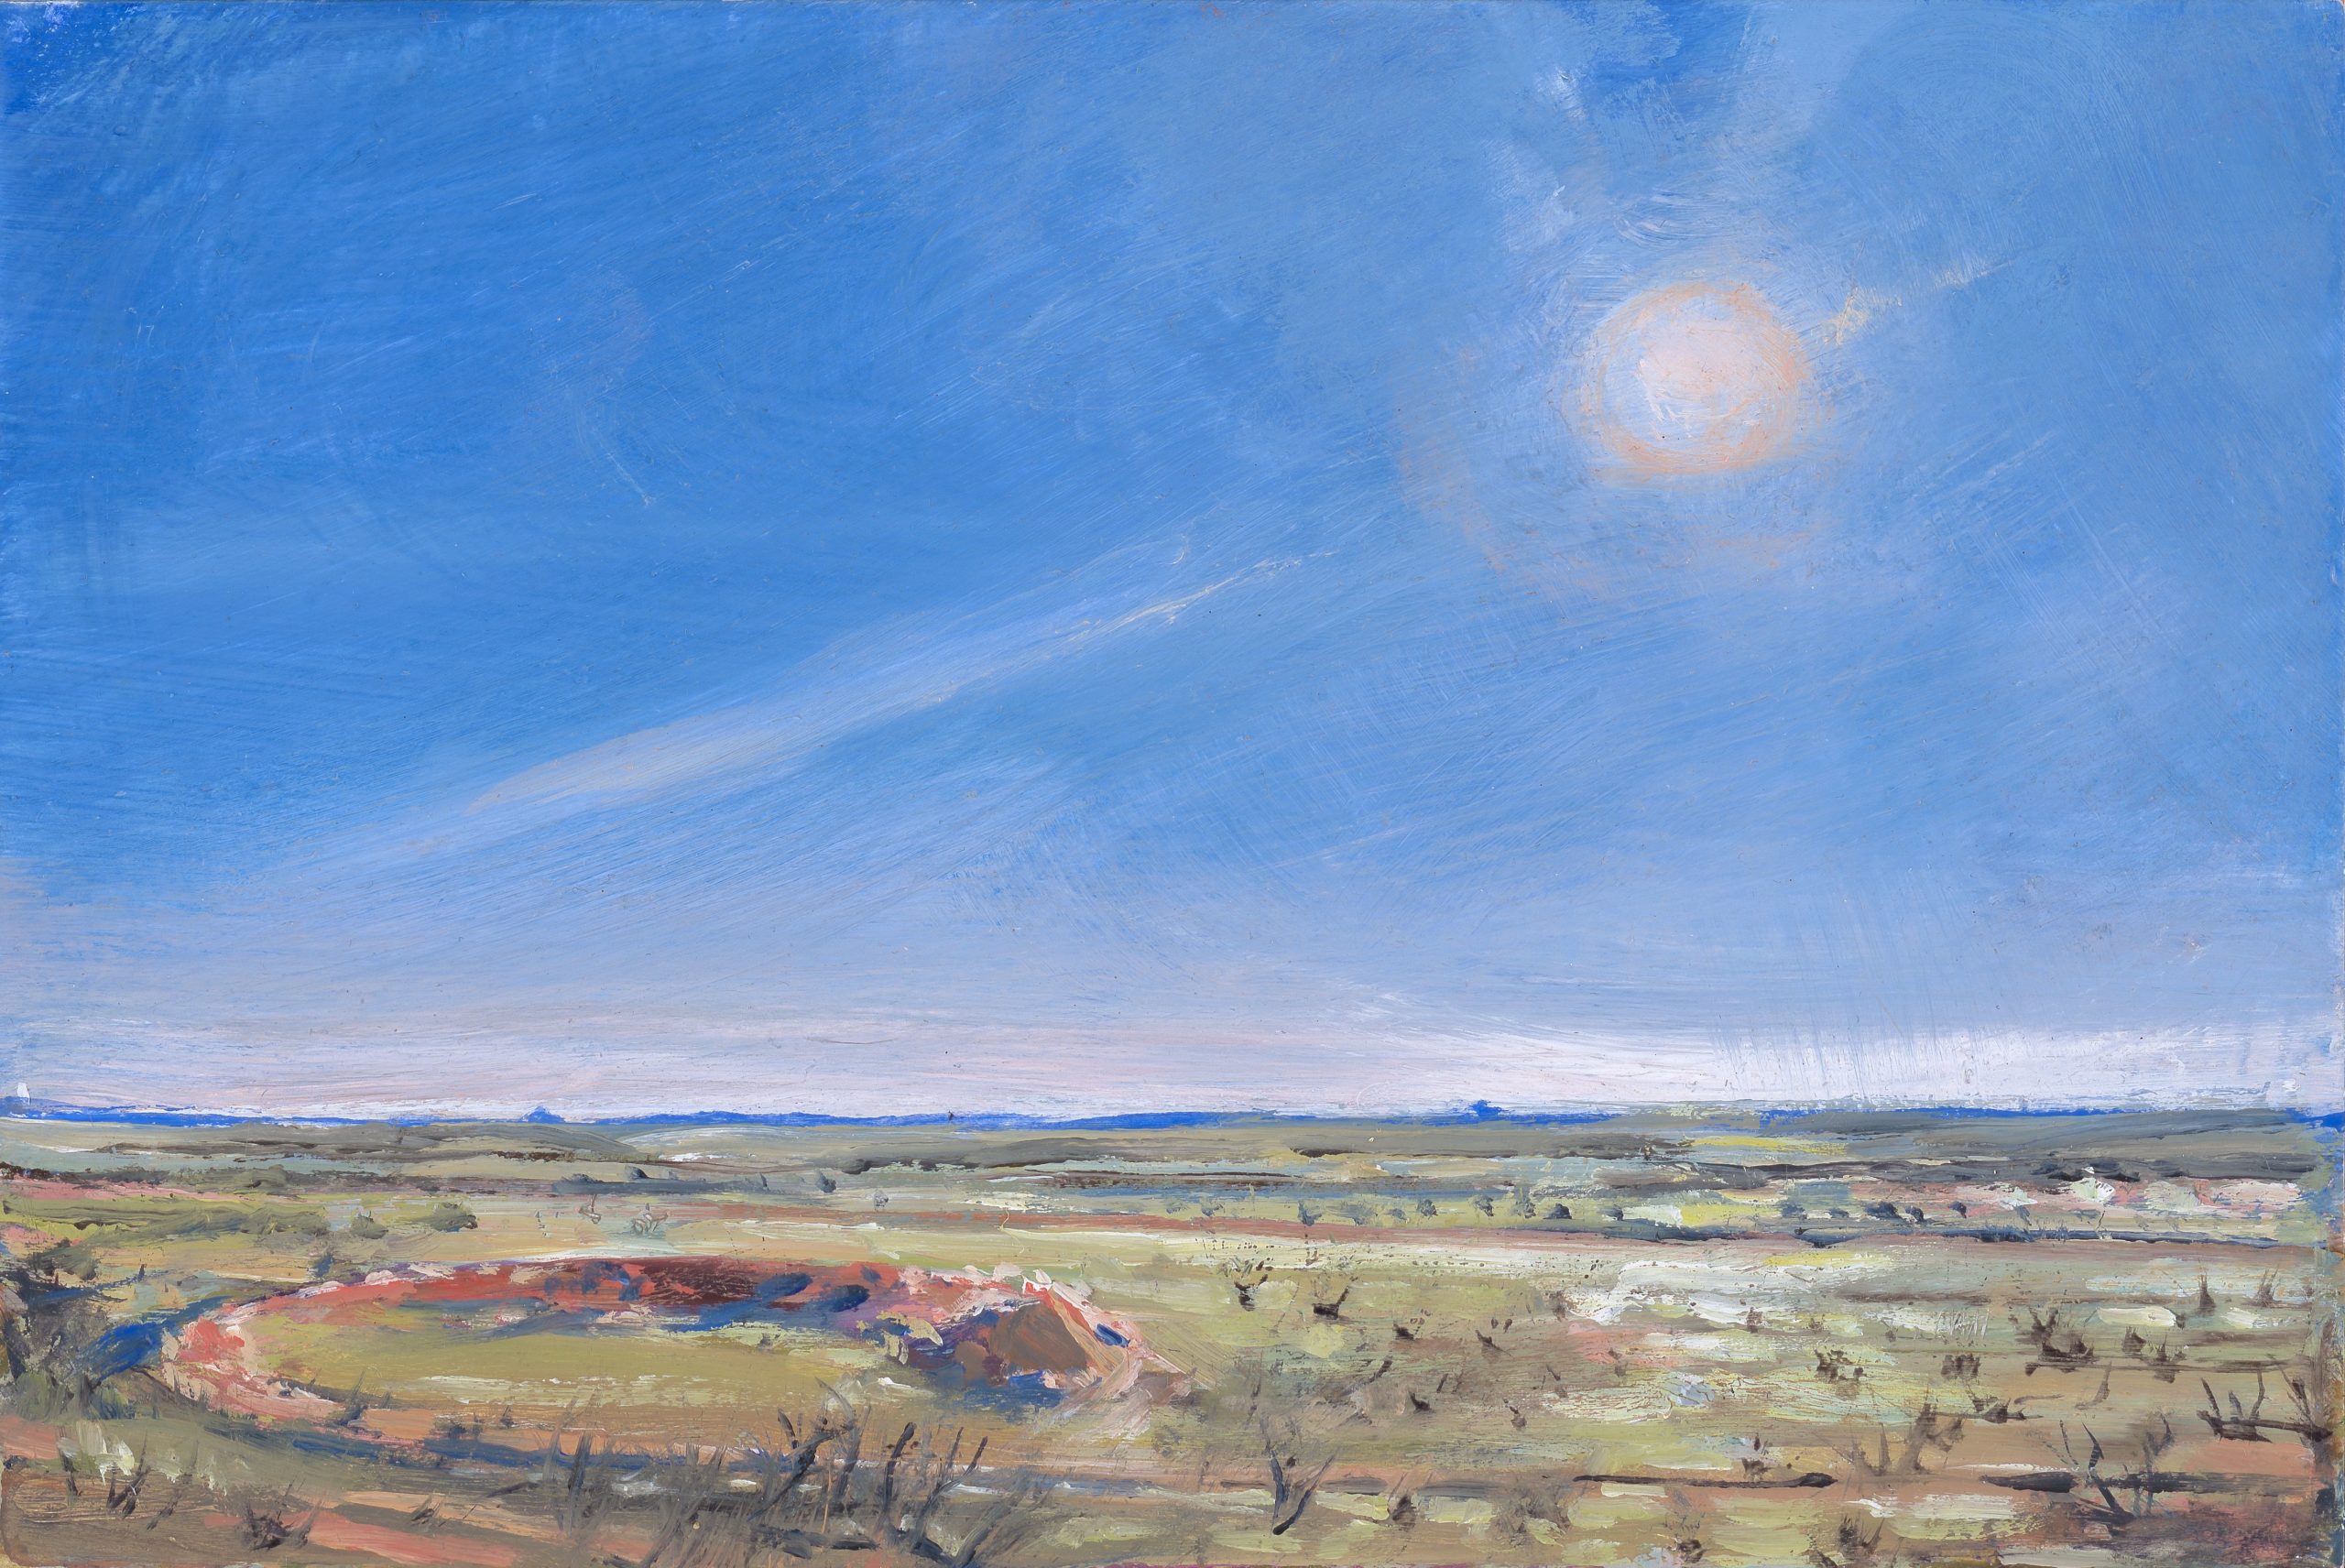 

											Don Stinson</b>

											<em>
												Beyond the Romantic</em> 

											<h4>
												Santa Fe: September 9 – November 26, 2022											</h4>

		                																																													<i>Amarillo Ramp, the world’s largest helium deposit and looking into the West Texas,</i>  
																																								2022, 
																																								oil on copper, 
																																								4 x 6 inches 
																								
		                				